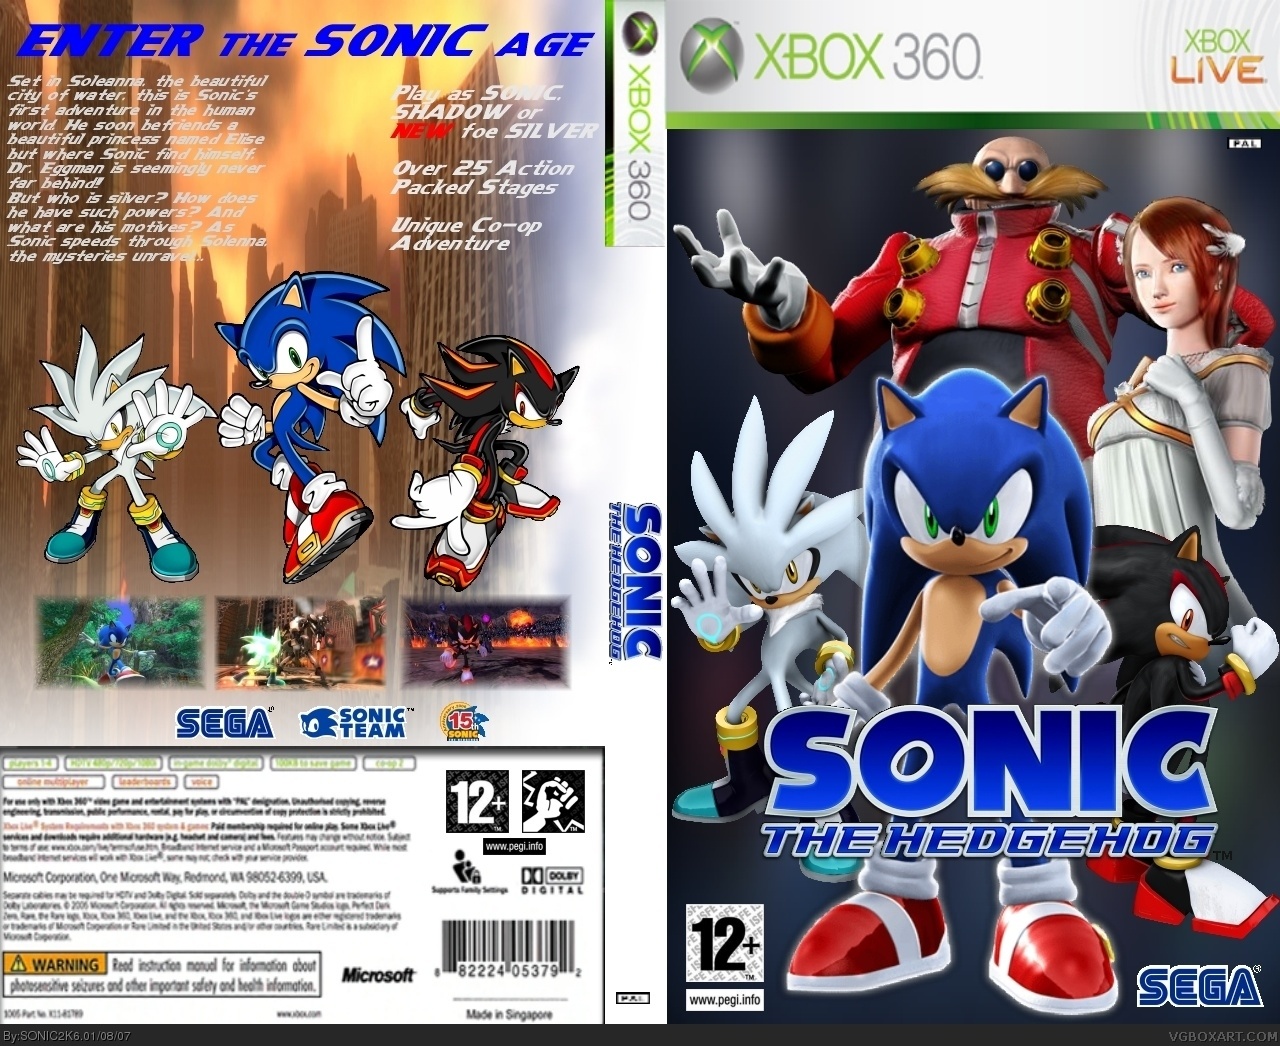 Viewing full size Sonic The Hedgehog box cover